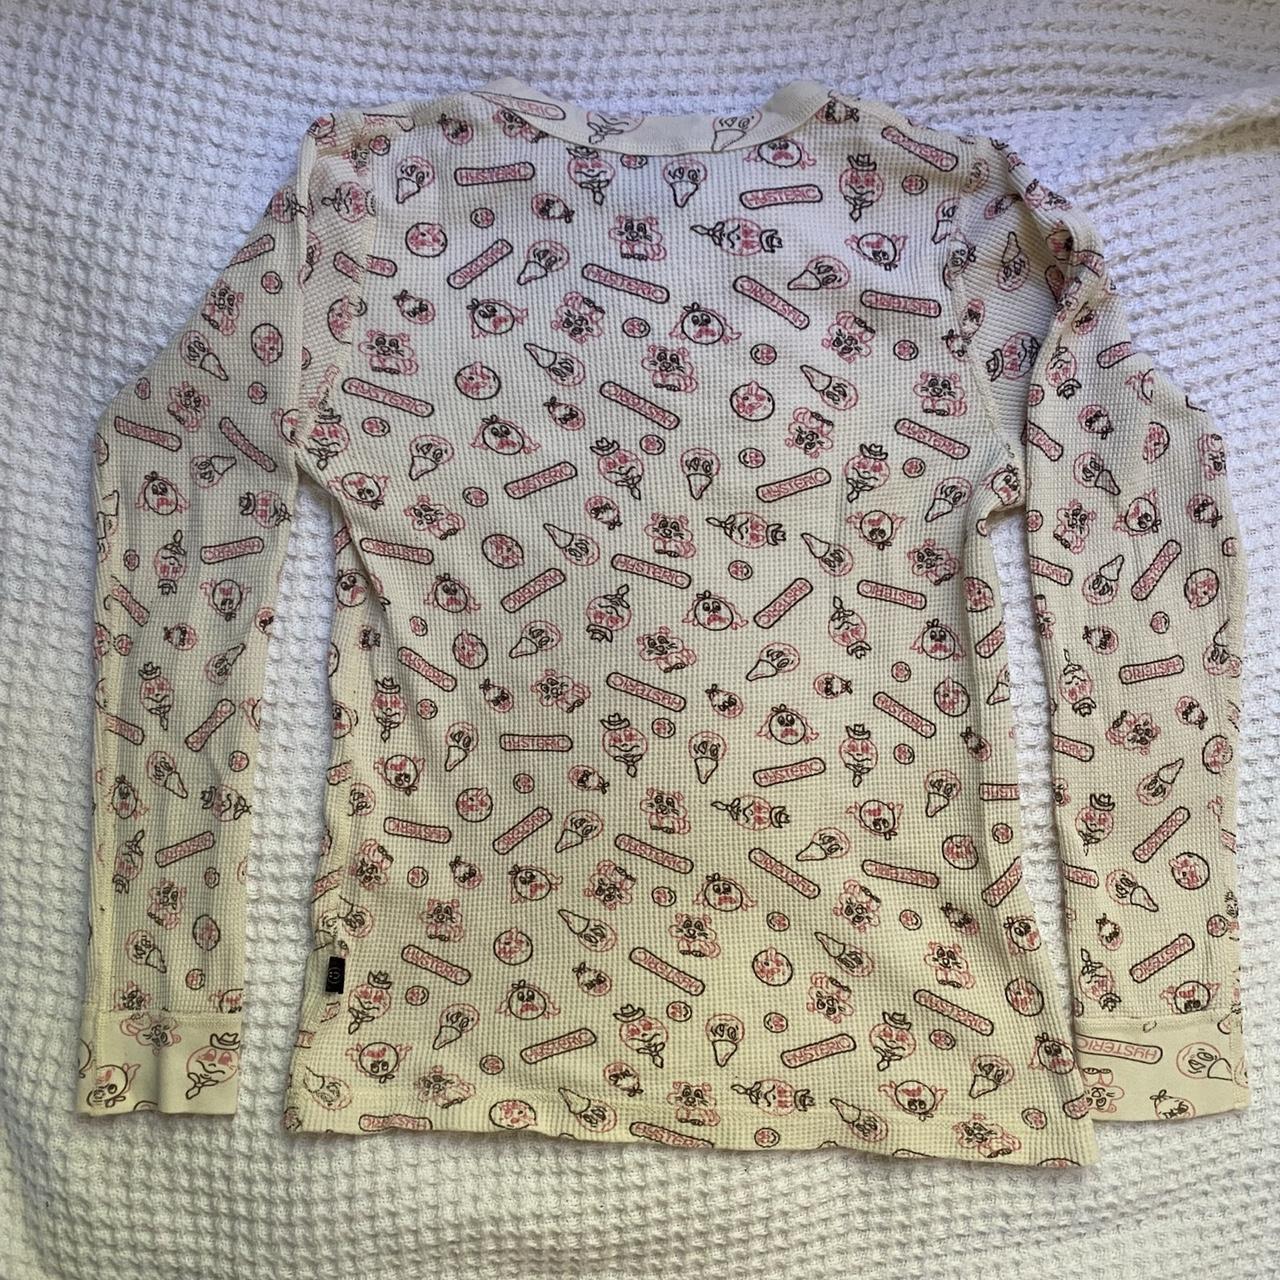 Hysteric Glamour Women's Cream and Pink Top | Depop